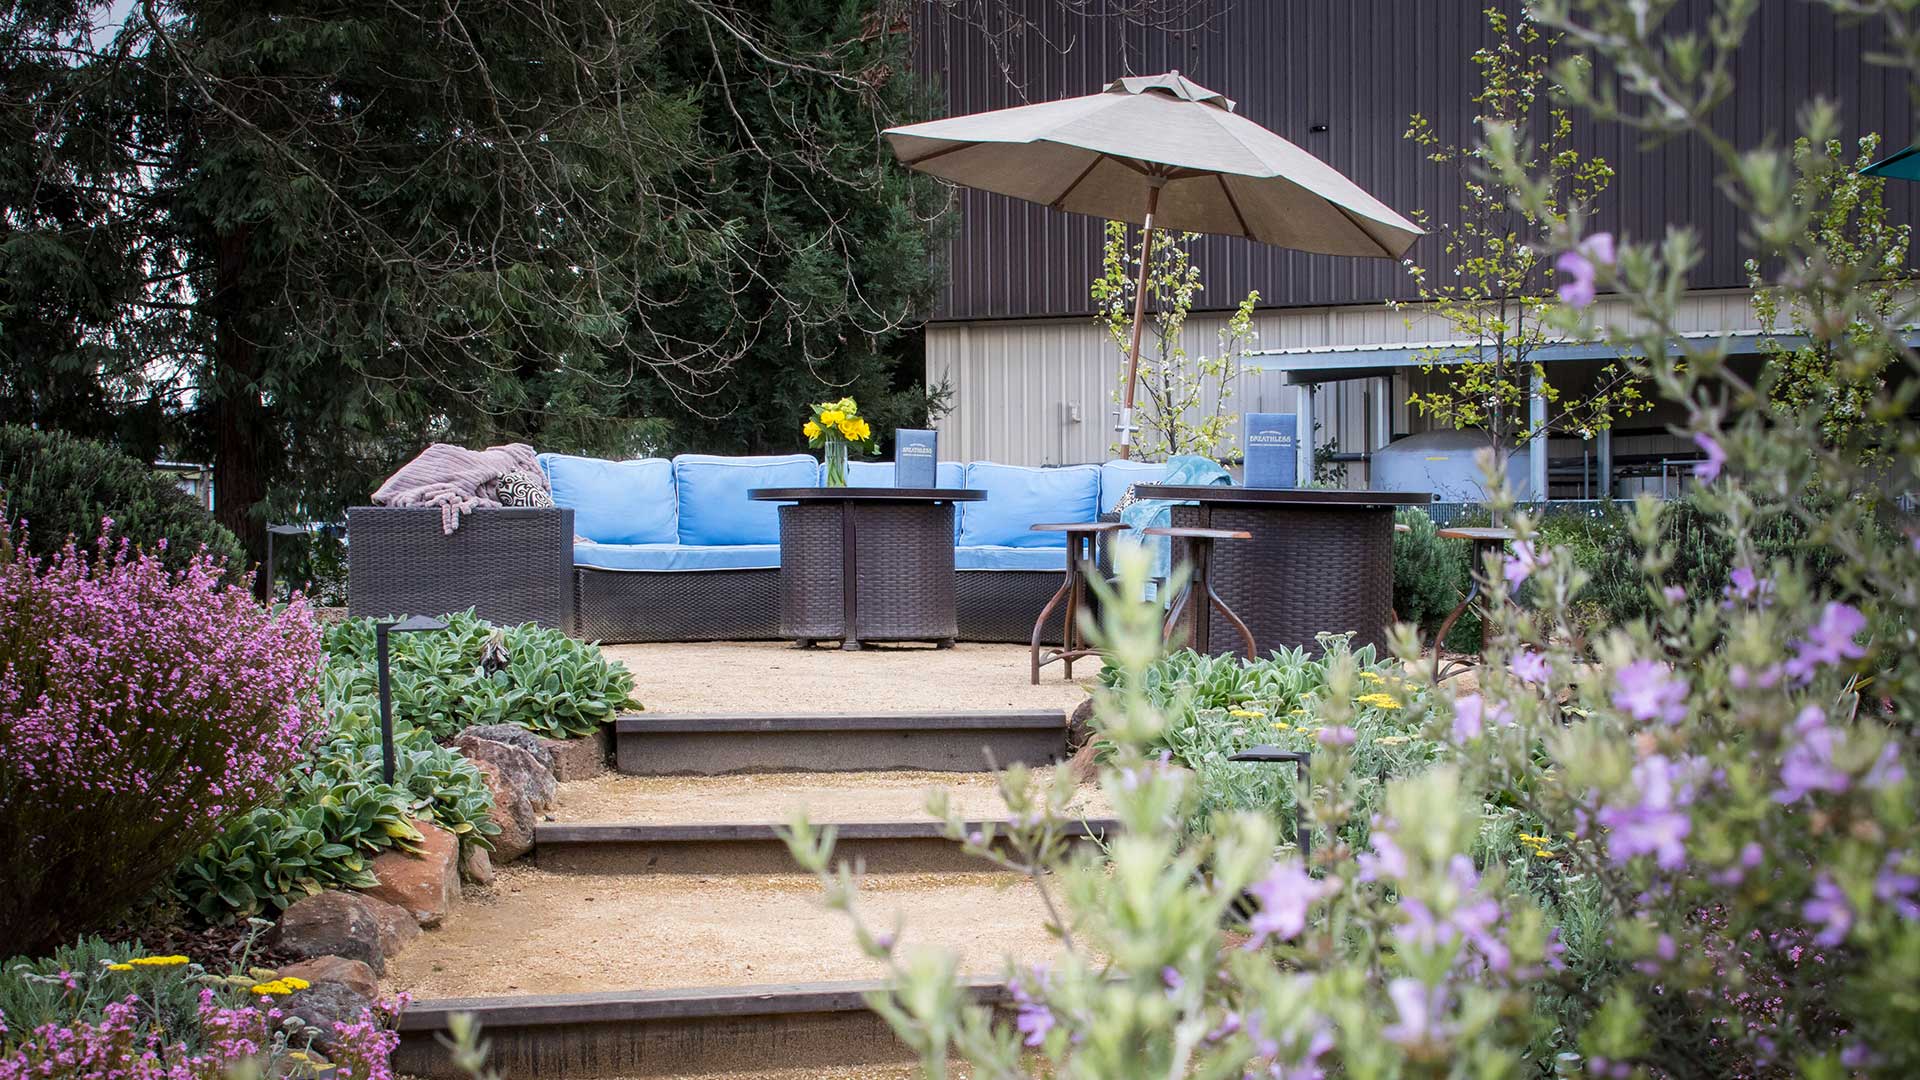 Outdoor seating area surrounded by flowers, with blue cushions and beige umbrellas.